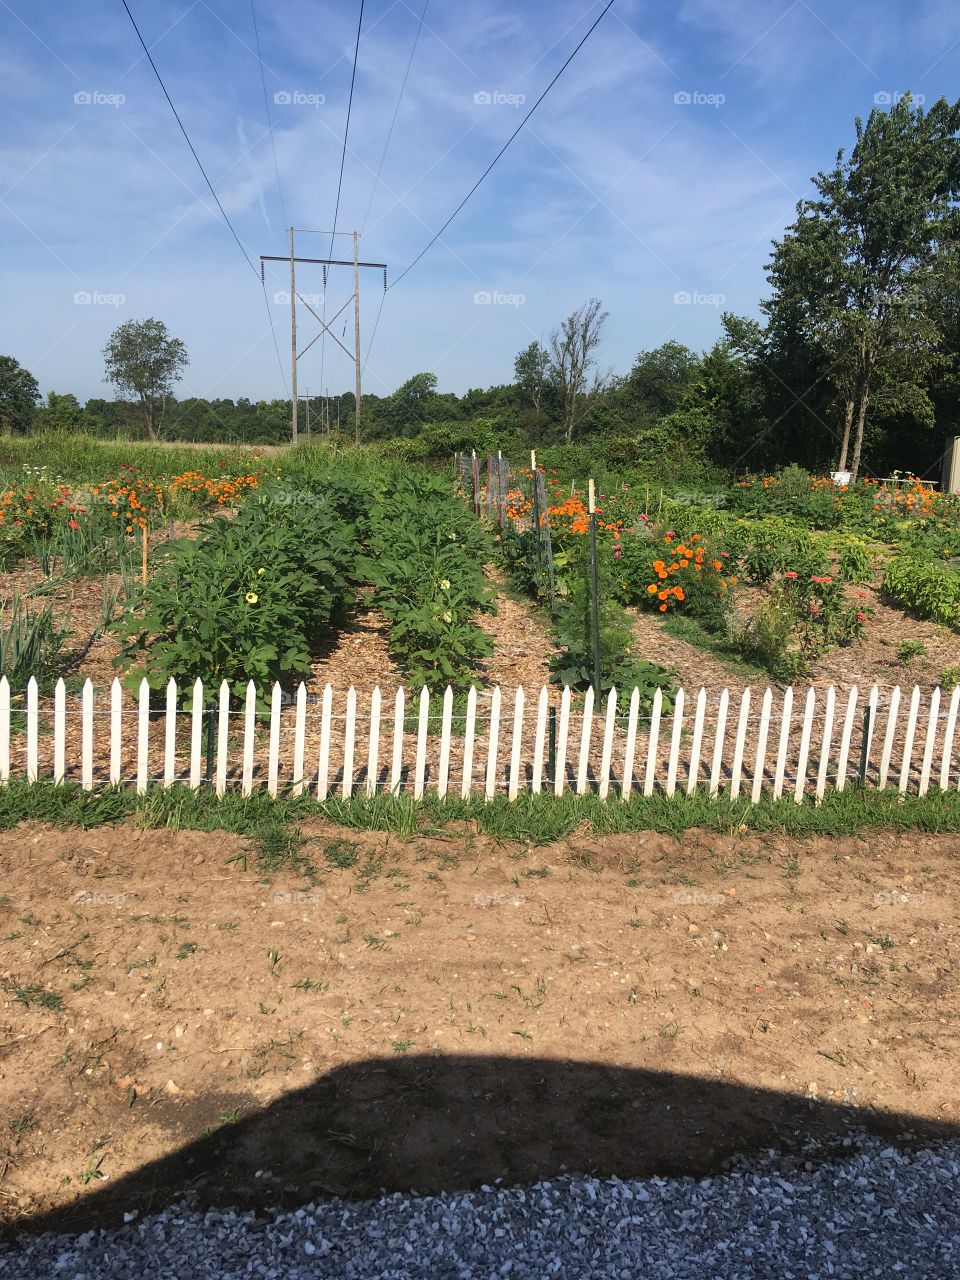 A picture of the food banks vegetable garden, real nice plants still growing strong.